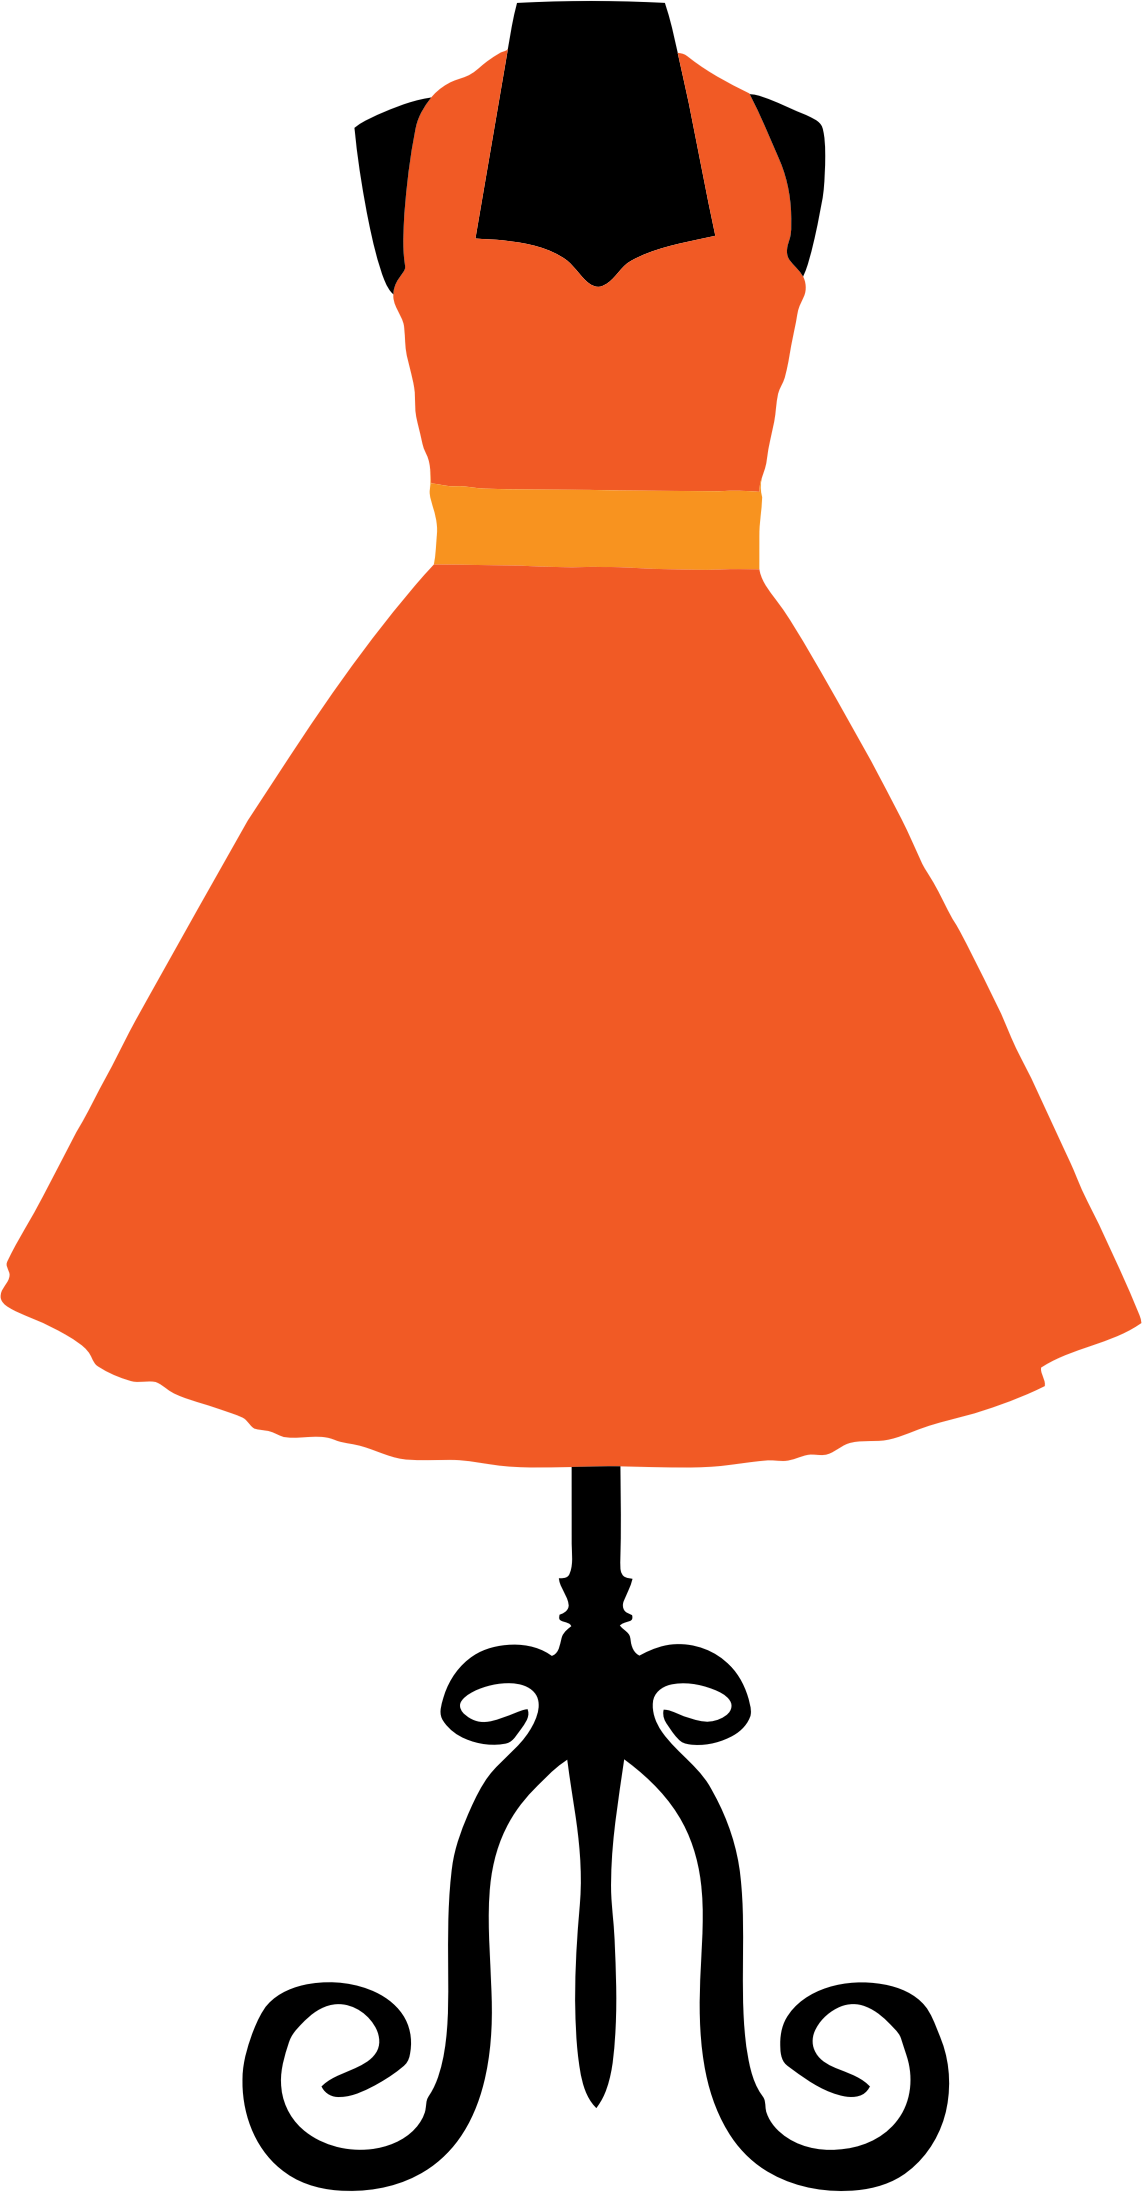 clipart picture of a dress - photo #29